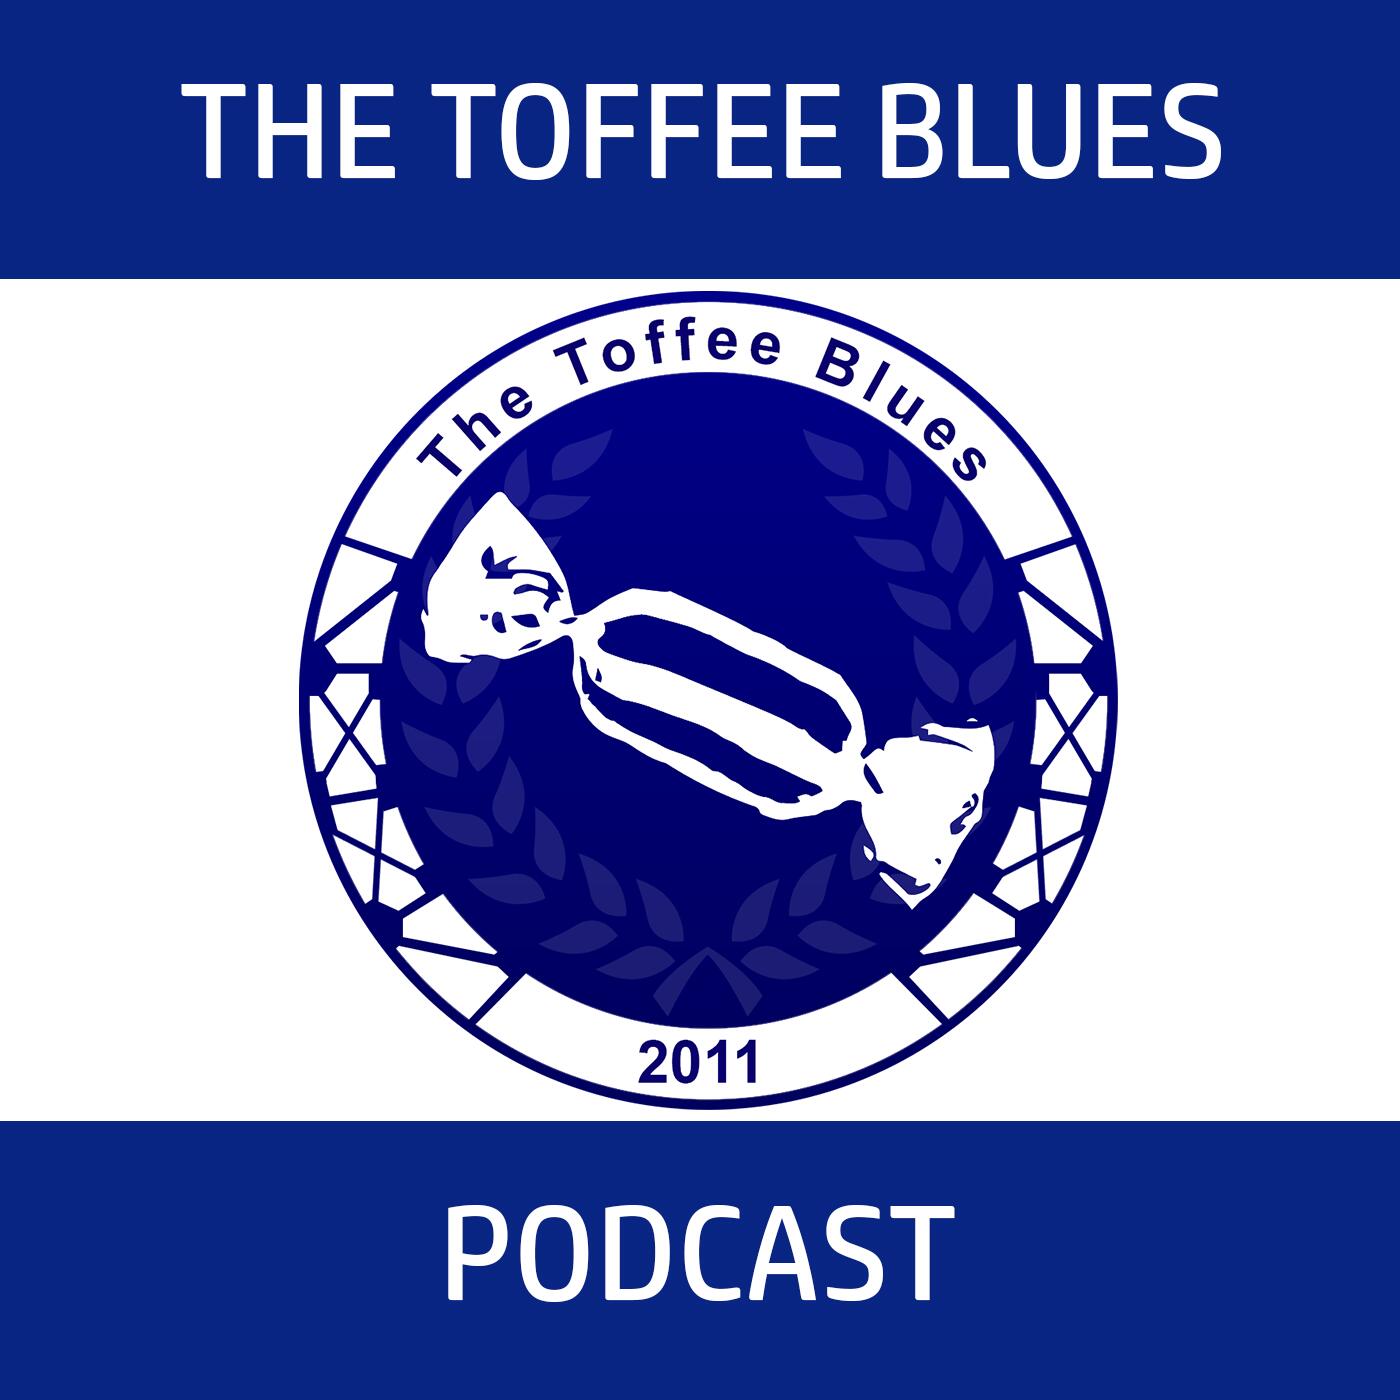 Blues support. Blue Podcast. The Toffees группа.